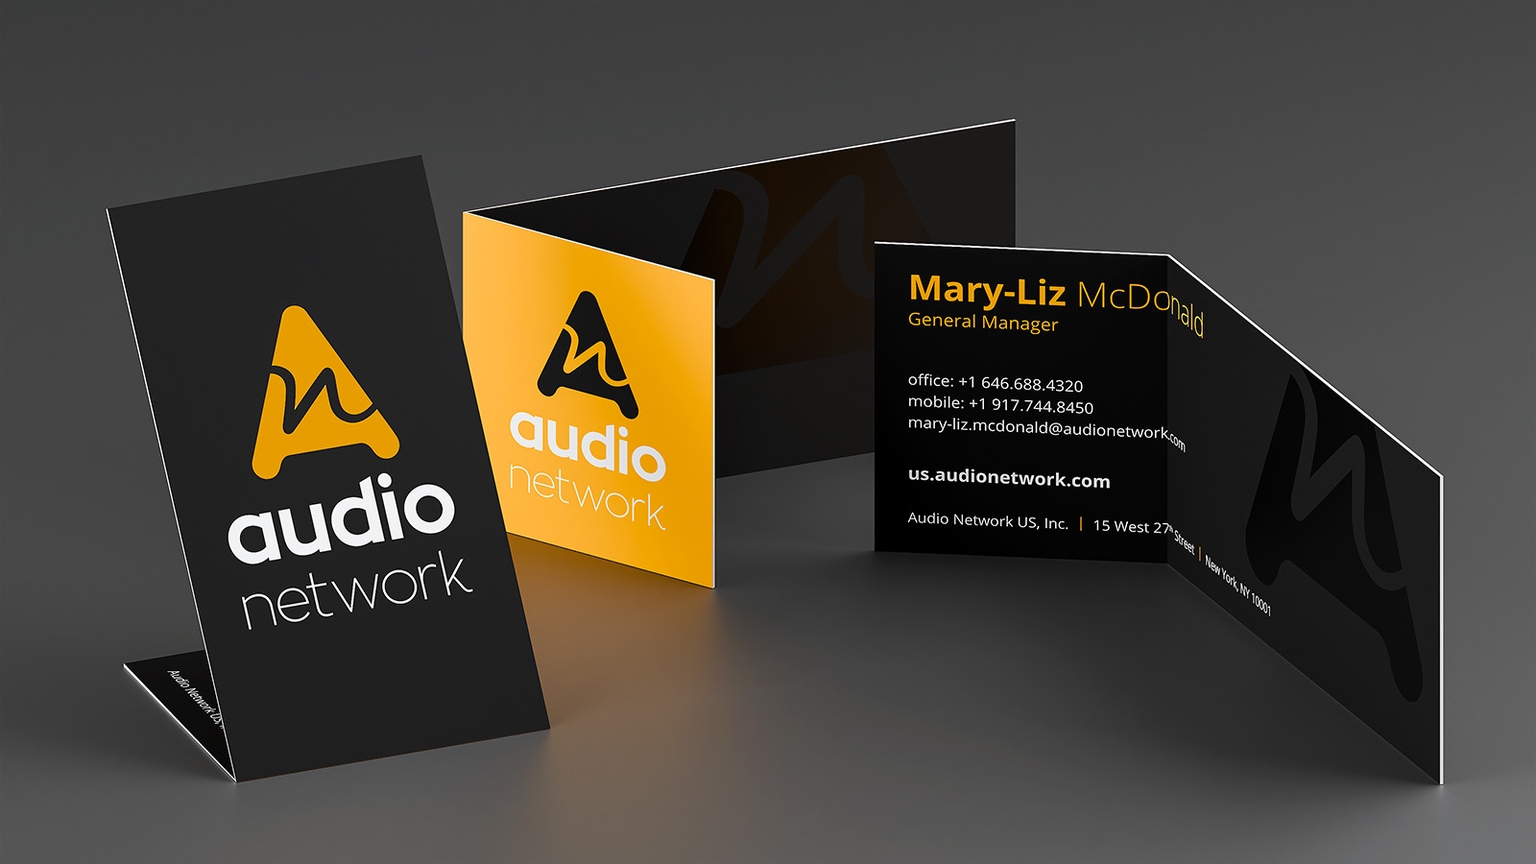 Rendering of Audio Network business card design.